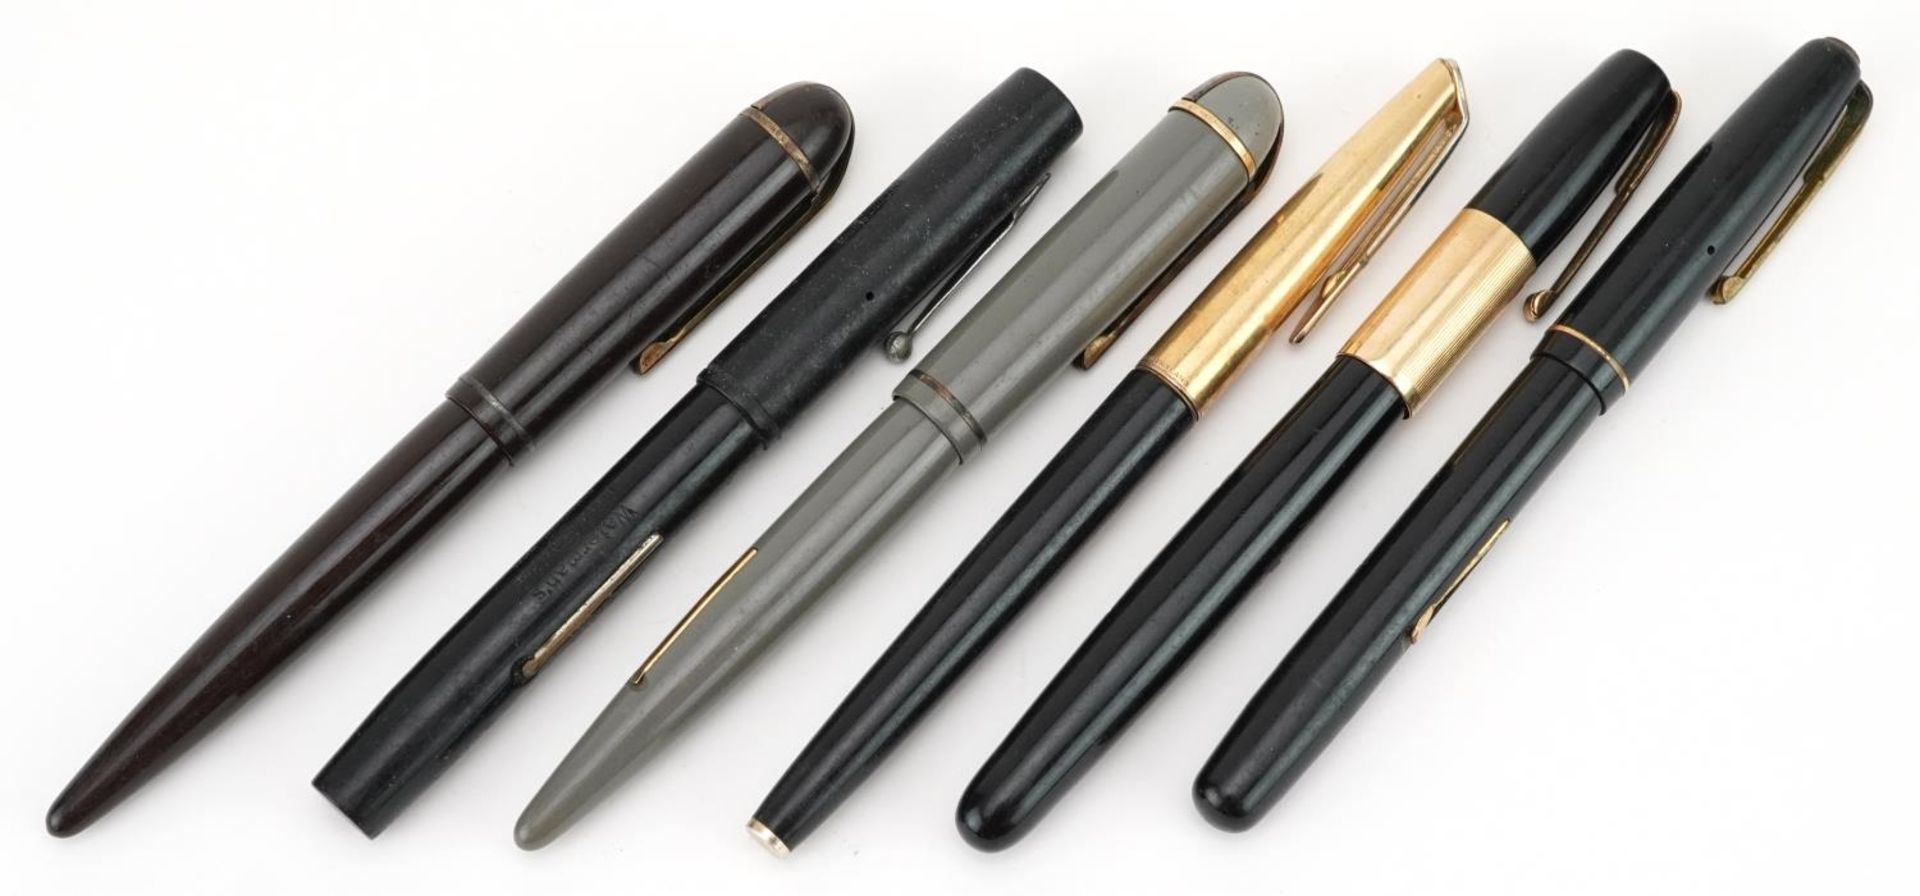 Four vintage Watermans fountain pens and two vintage Eversharp Skyline fountain pens, five with gold